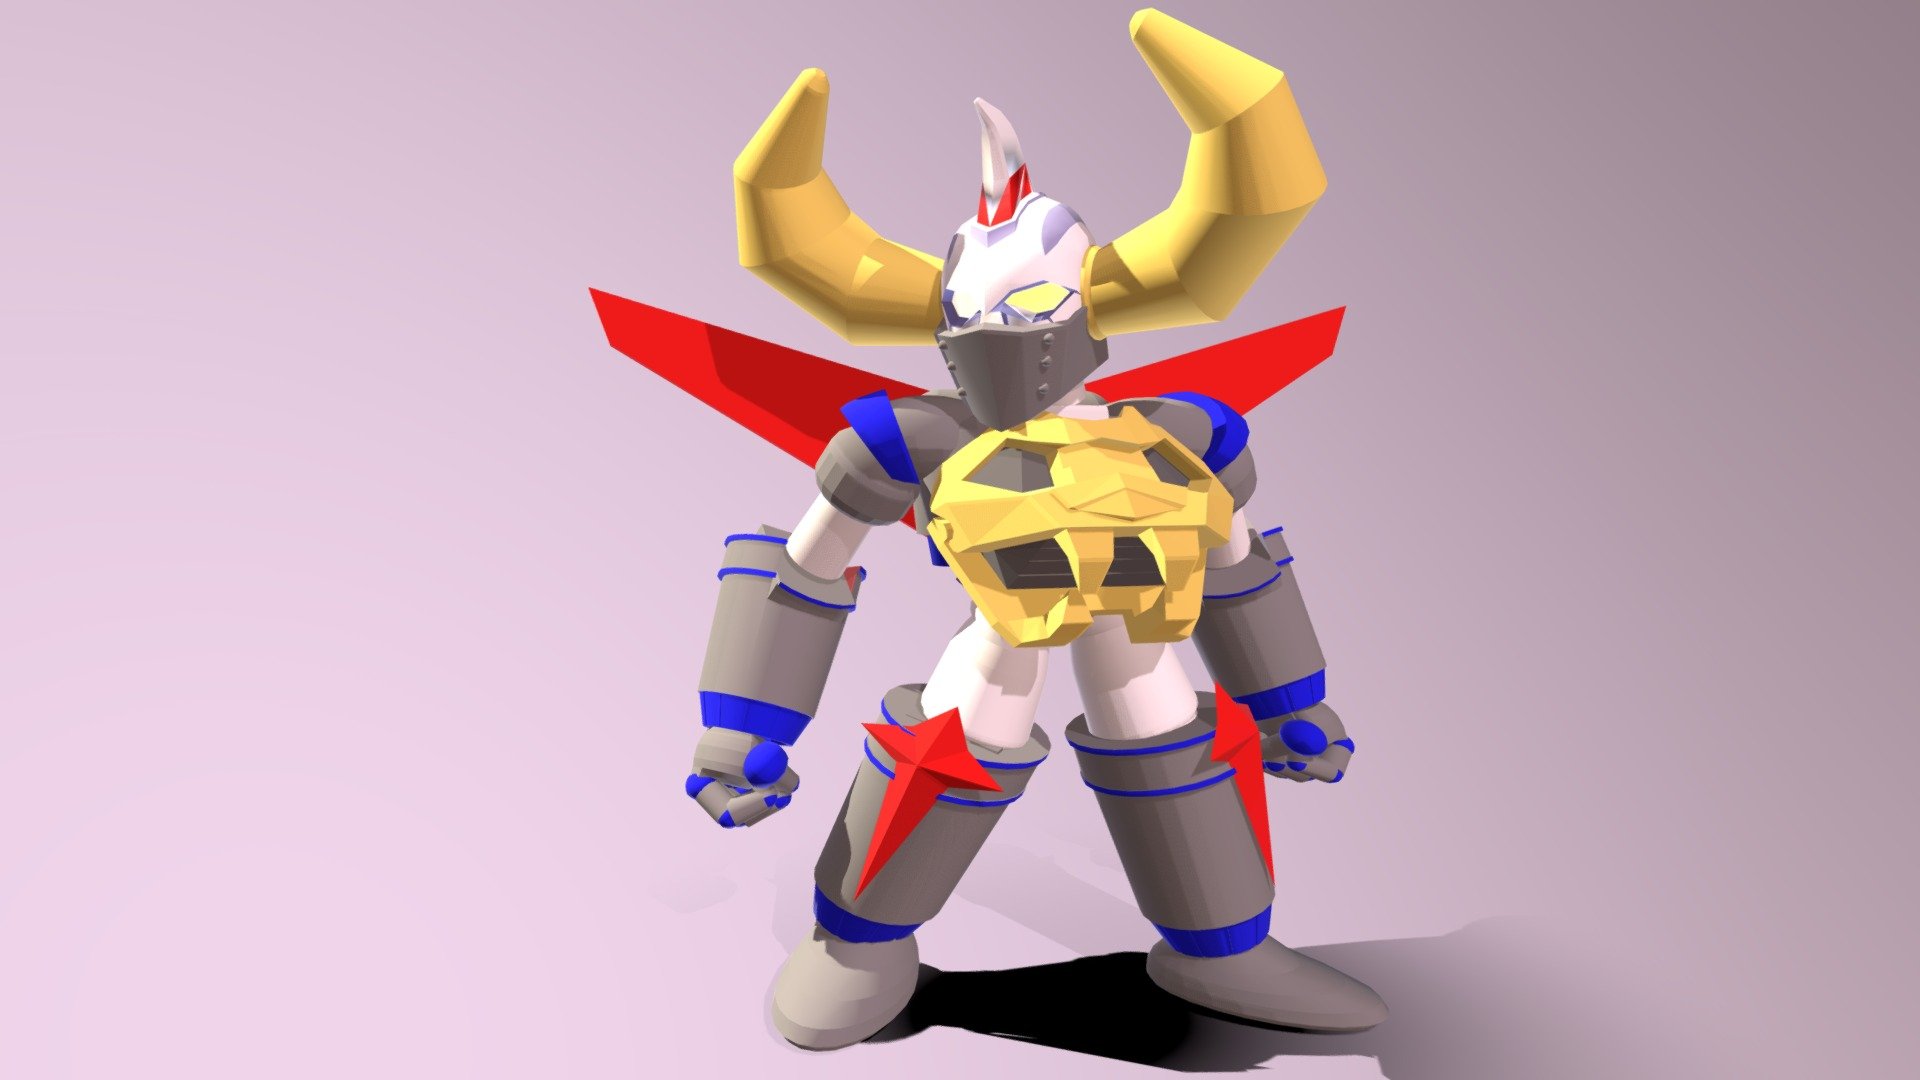 gaiking cartoon robot excellent details the textures and colors are modifiable, this is created to be used in the metaverse, to be added in games and animations 3d model